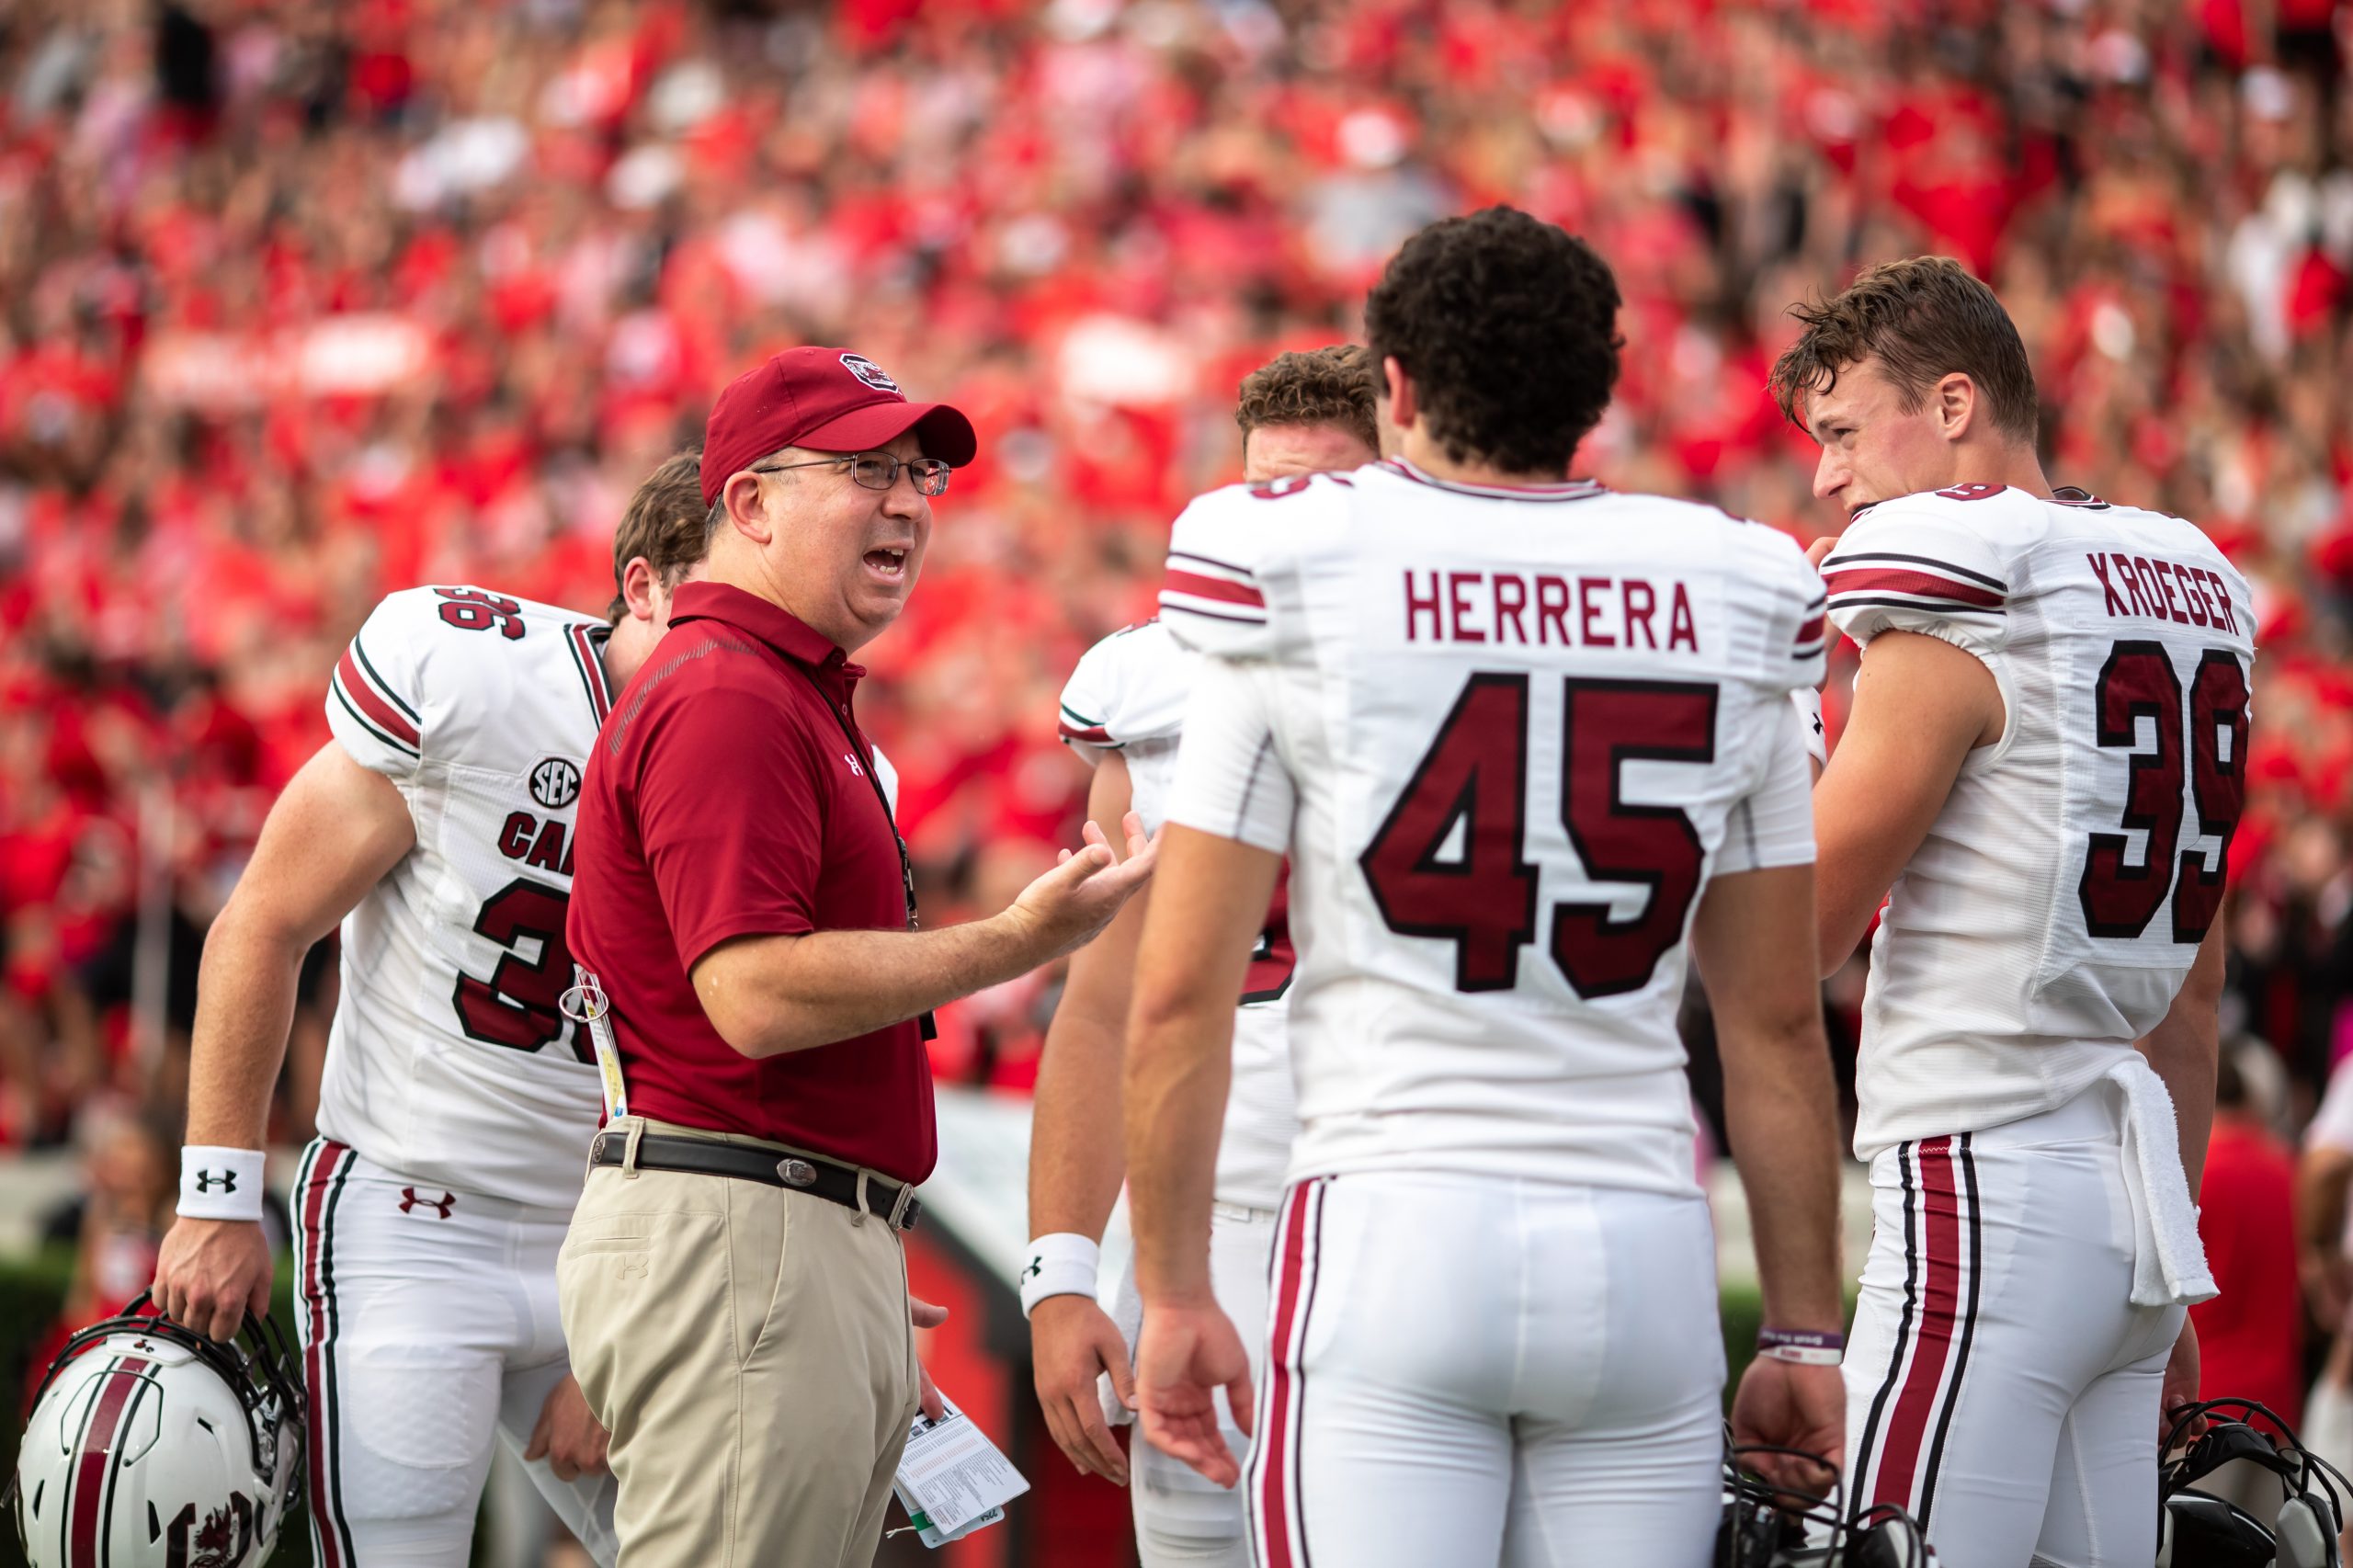 Hired by USC Head Coach Shane Beamer, Pete Lembo is esteemed as the best special teams coordinator in the country, leading the Gamecocks to a No. 1 ranking in an efficiency rating compiled by ESPN. Pete was also named a semifinalist for the Broyles Award, which goes to the Assistant Coach of the Year, and was named Special Teams Coach of the Year for the second time in the past four seasons by football statistics expert Phil Steele. Photography courtesy of USC Athletics